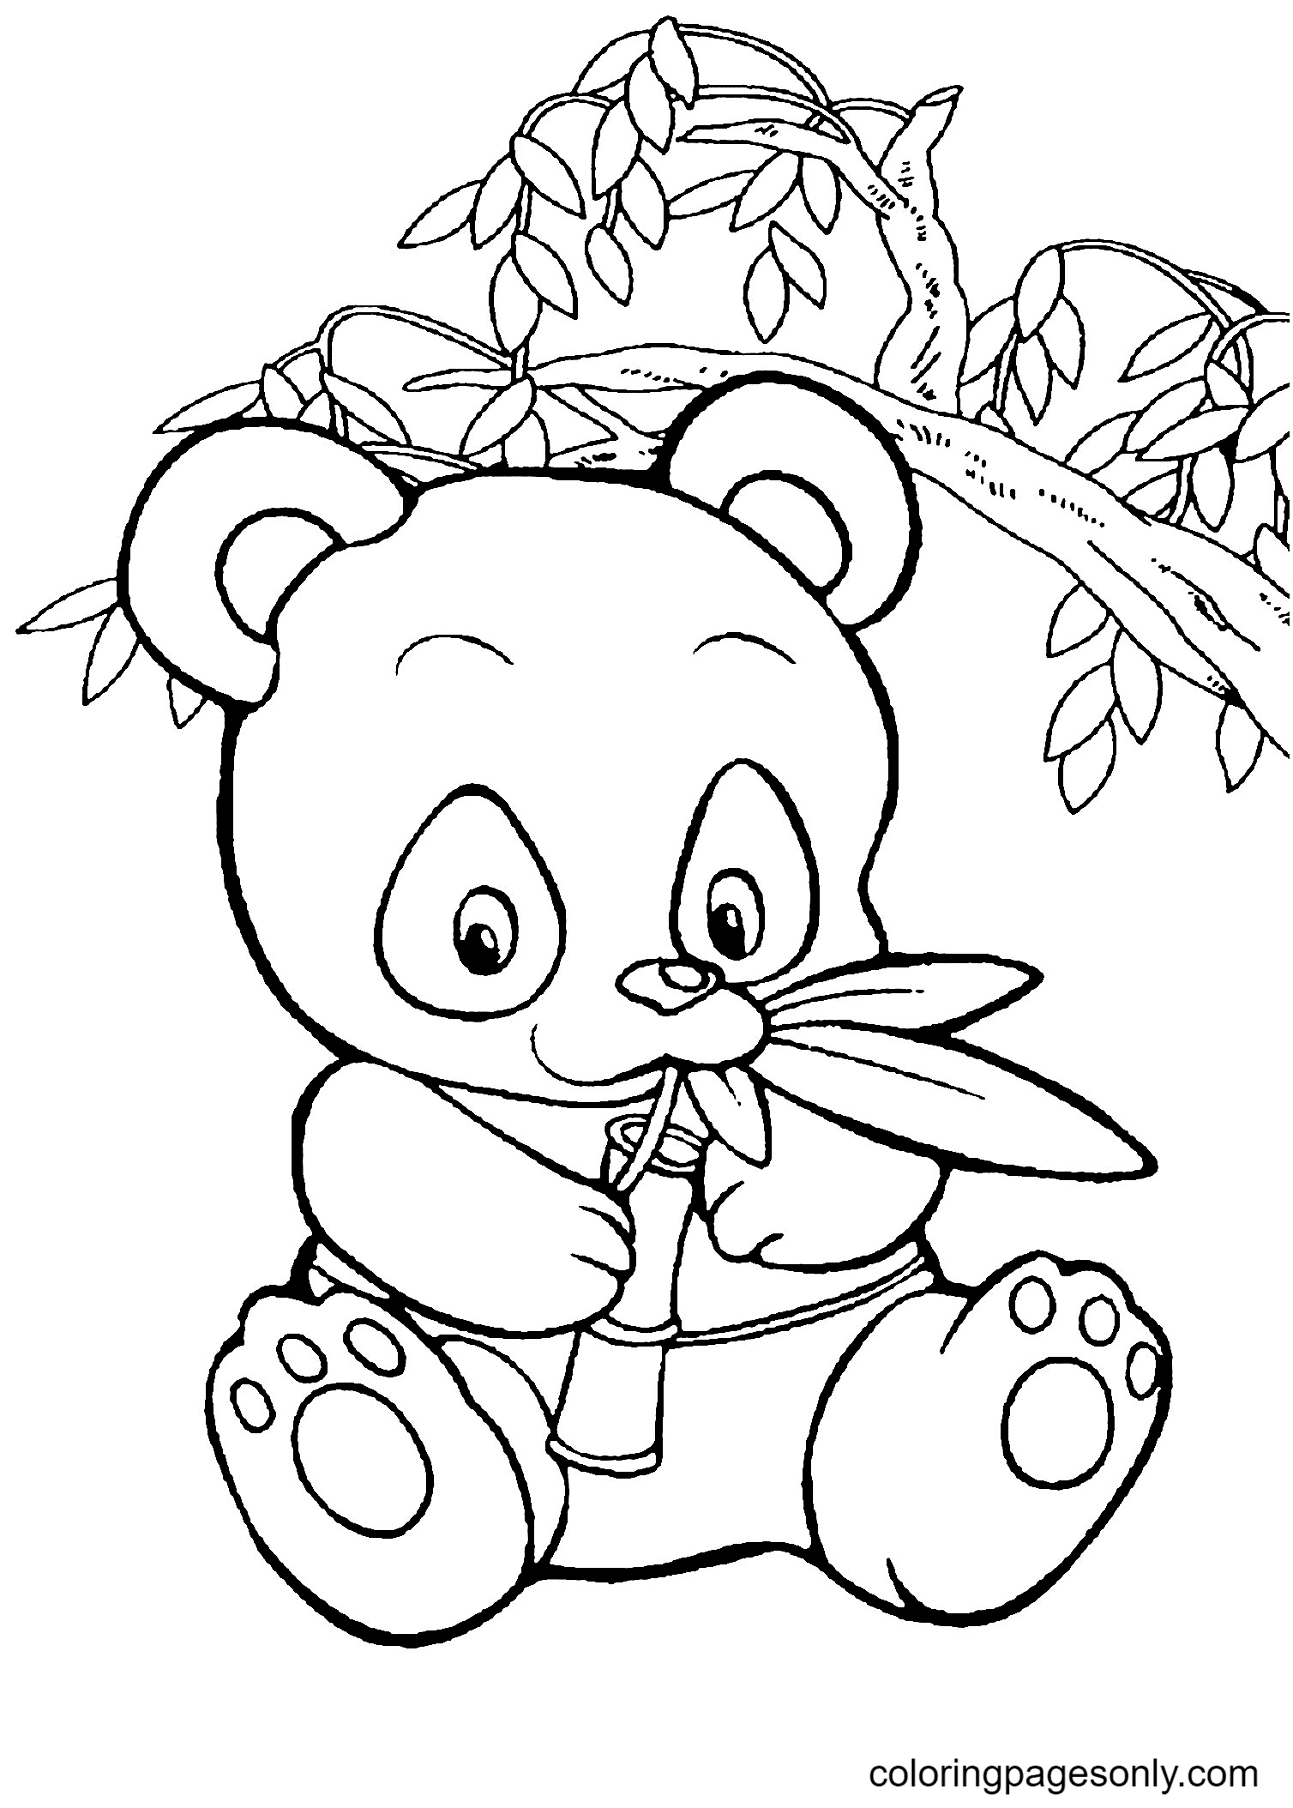 Baby Panda Is Eating Bamboo Coloring Pages